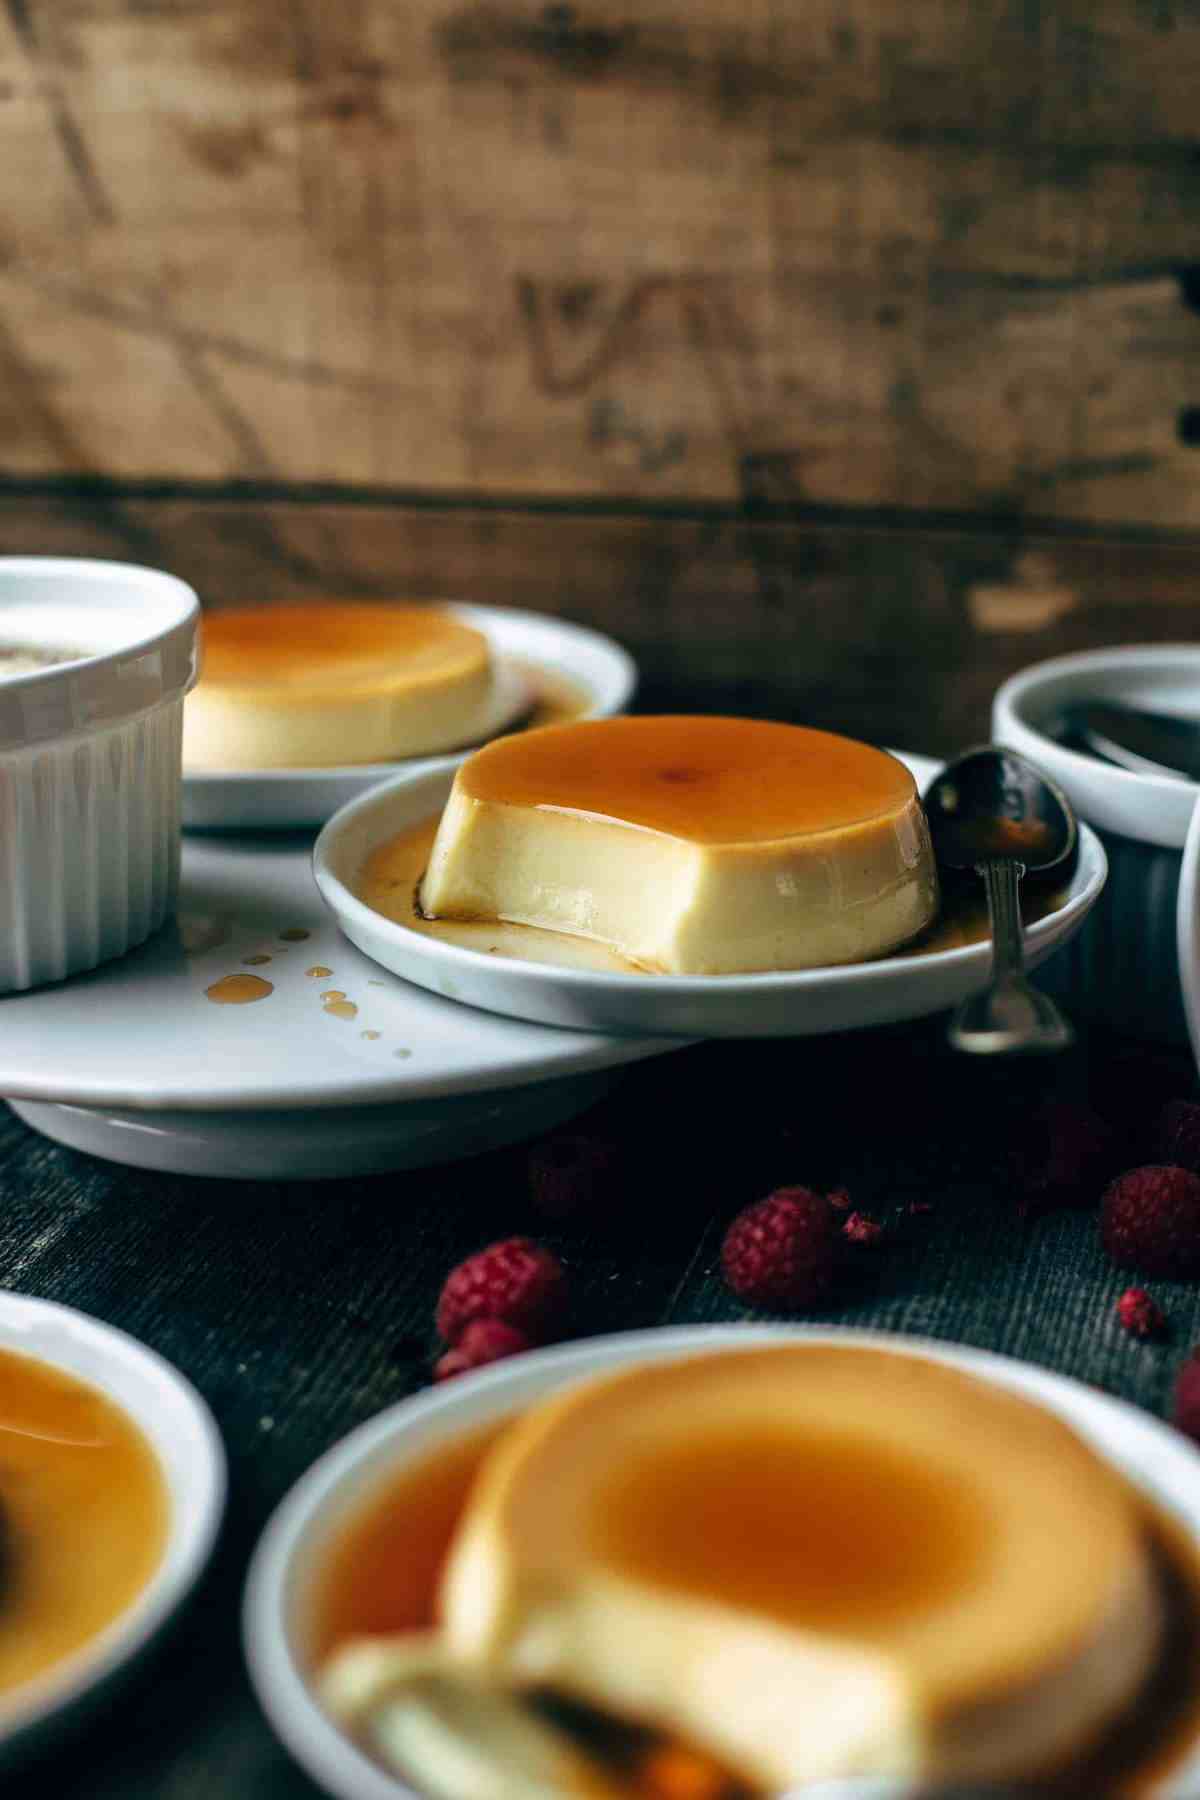 three dessert plates with flan and thin sugar syrup on a wooden table